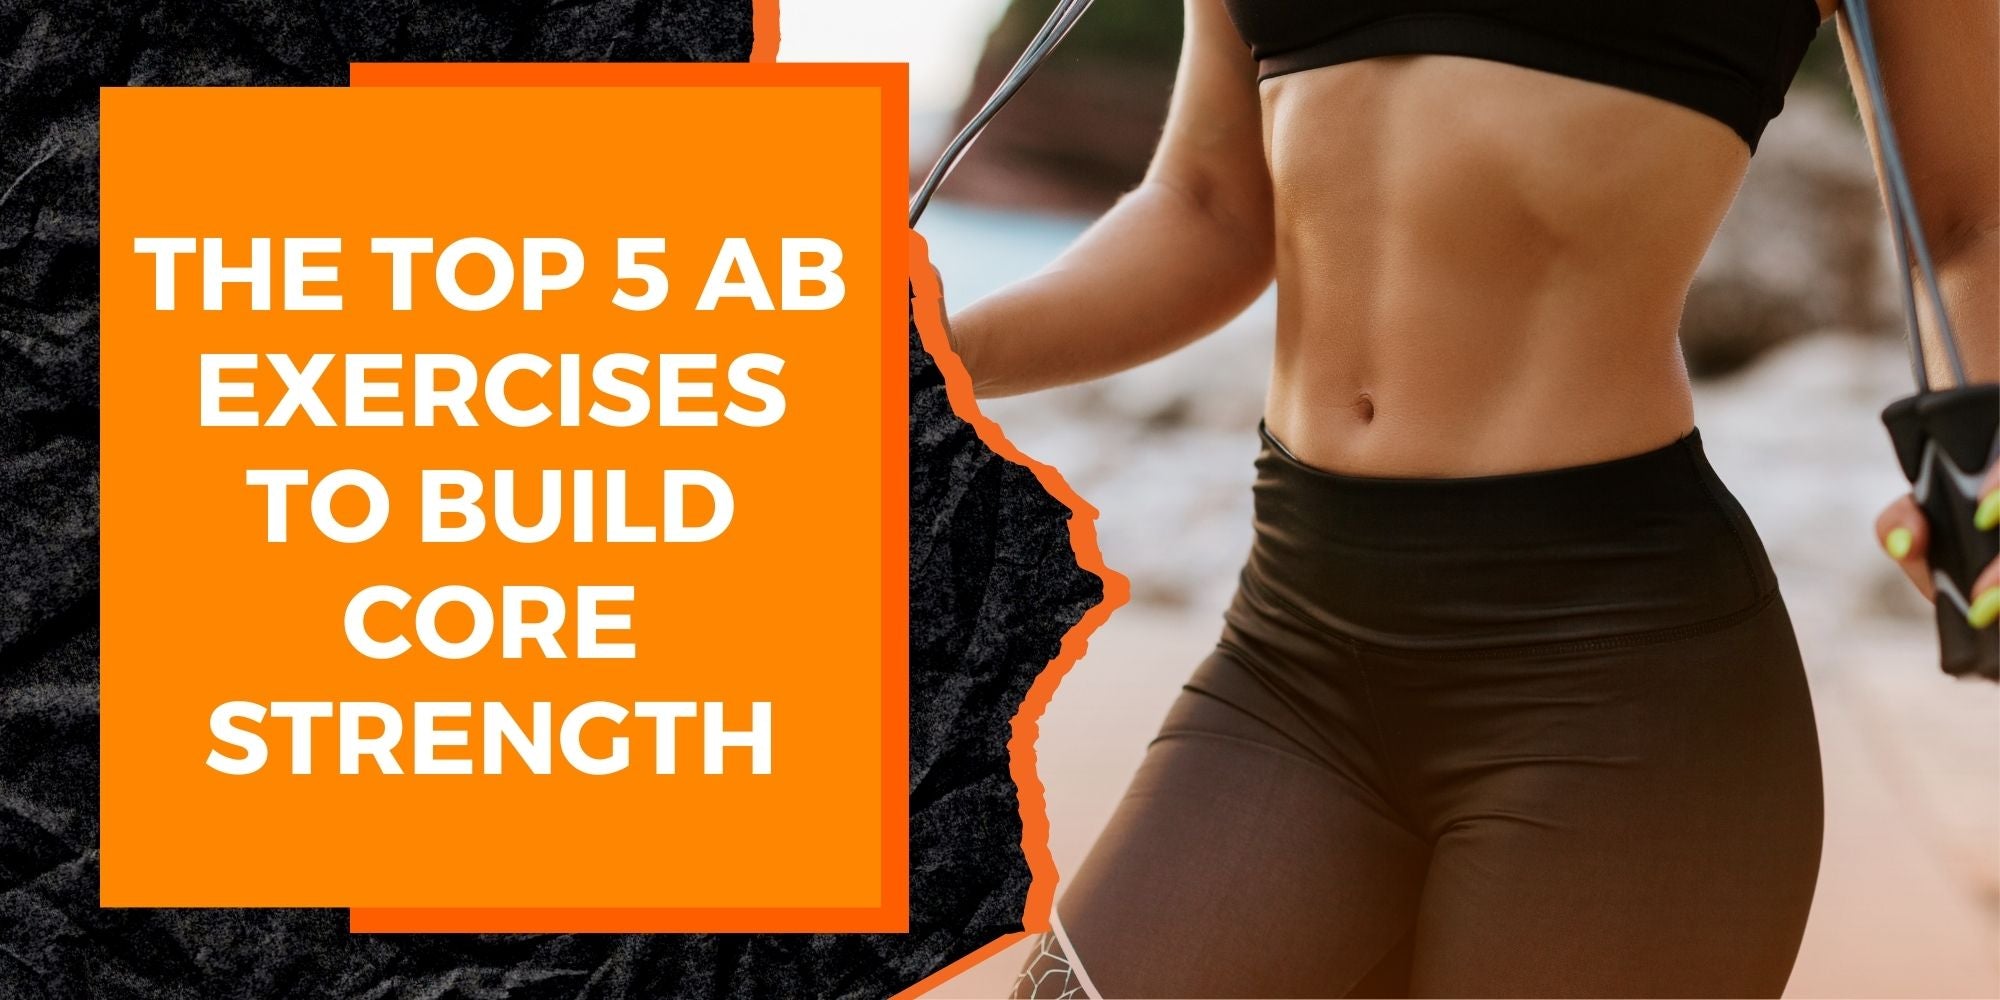 The Top 5 Ab Exercises to Build Core Strength